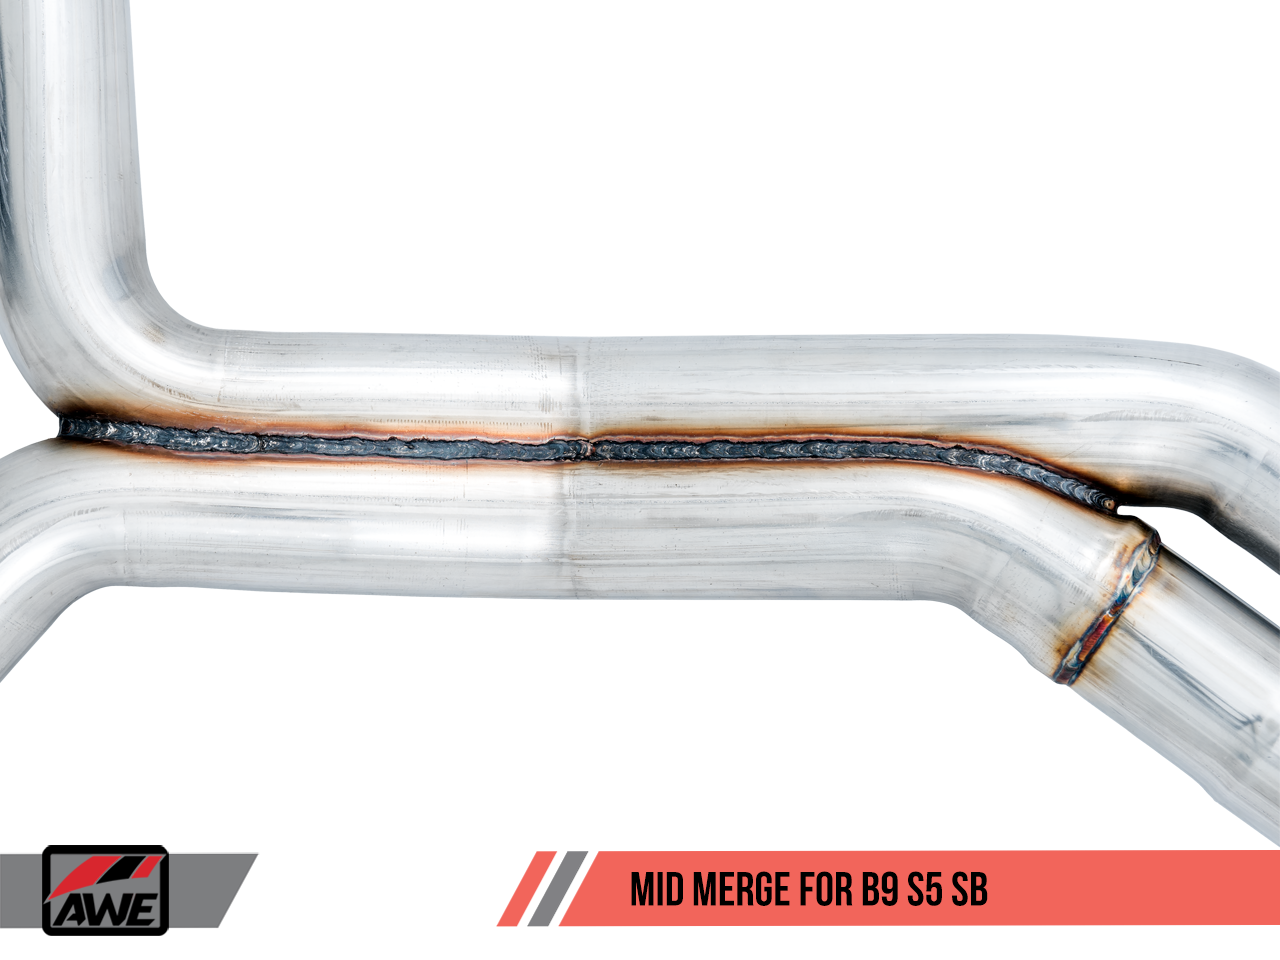 AWE SwitchPath™ Exhaust for B9 S5 Sportback - Resonated for Performance Catalyst - Motorsports LA